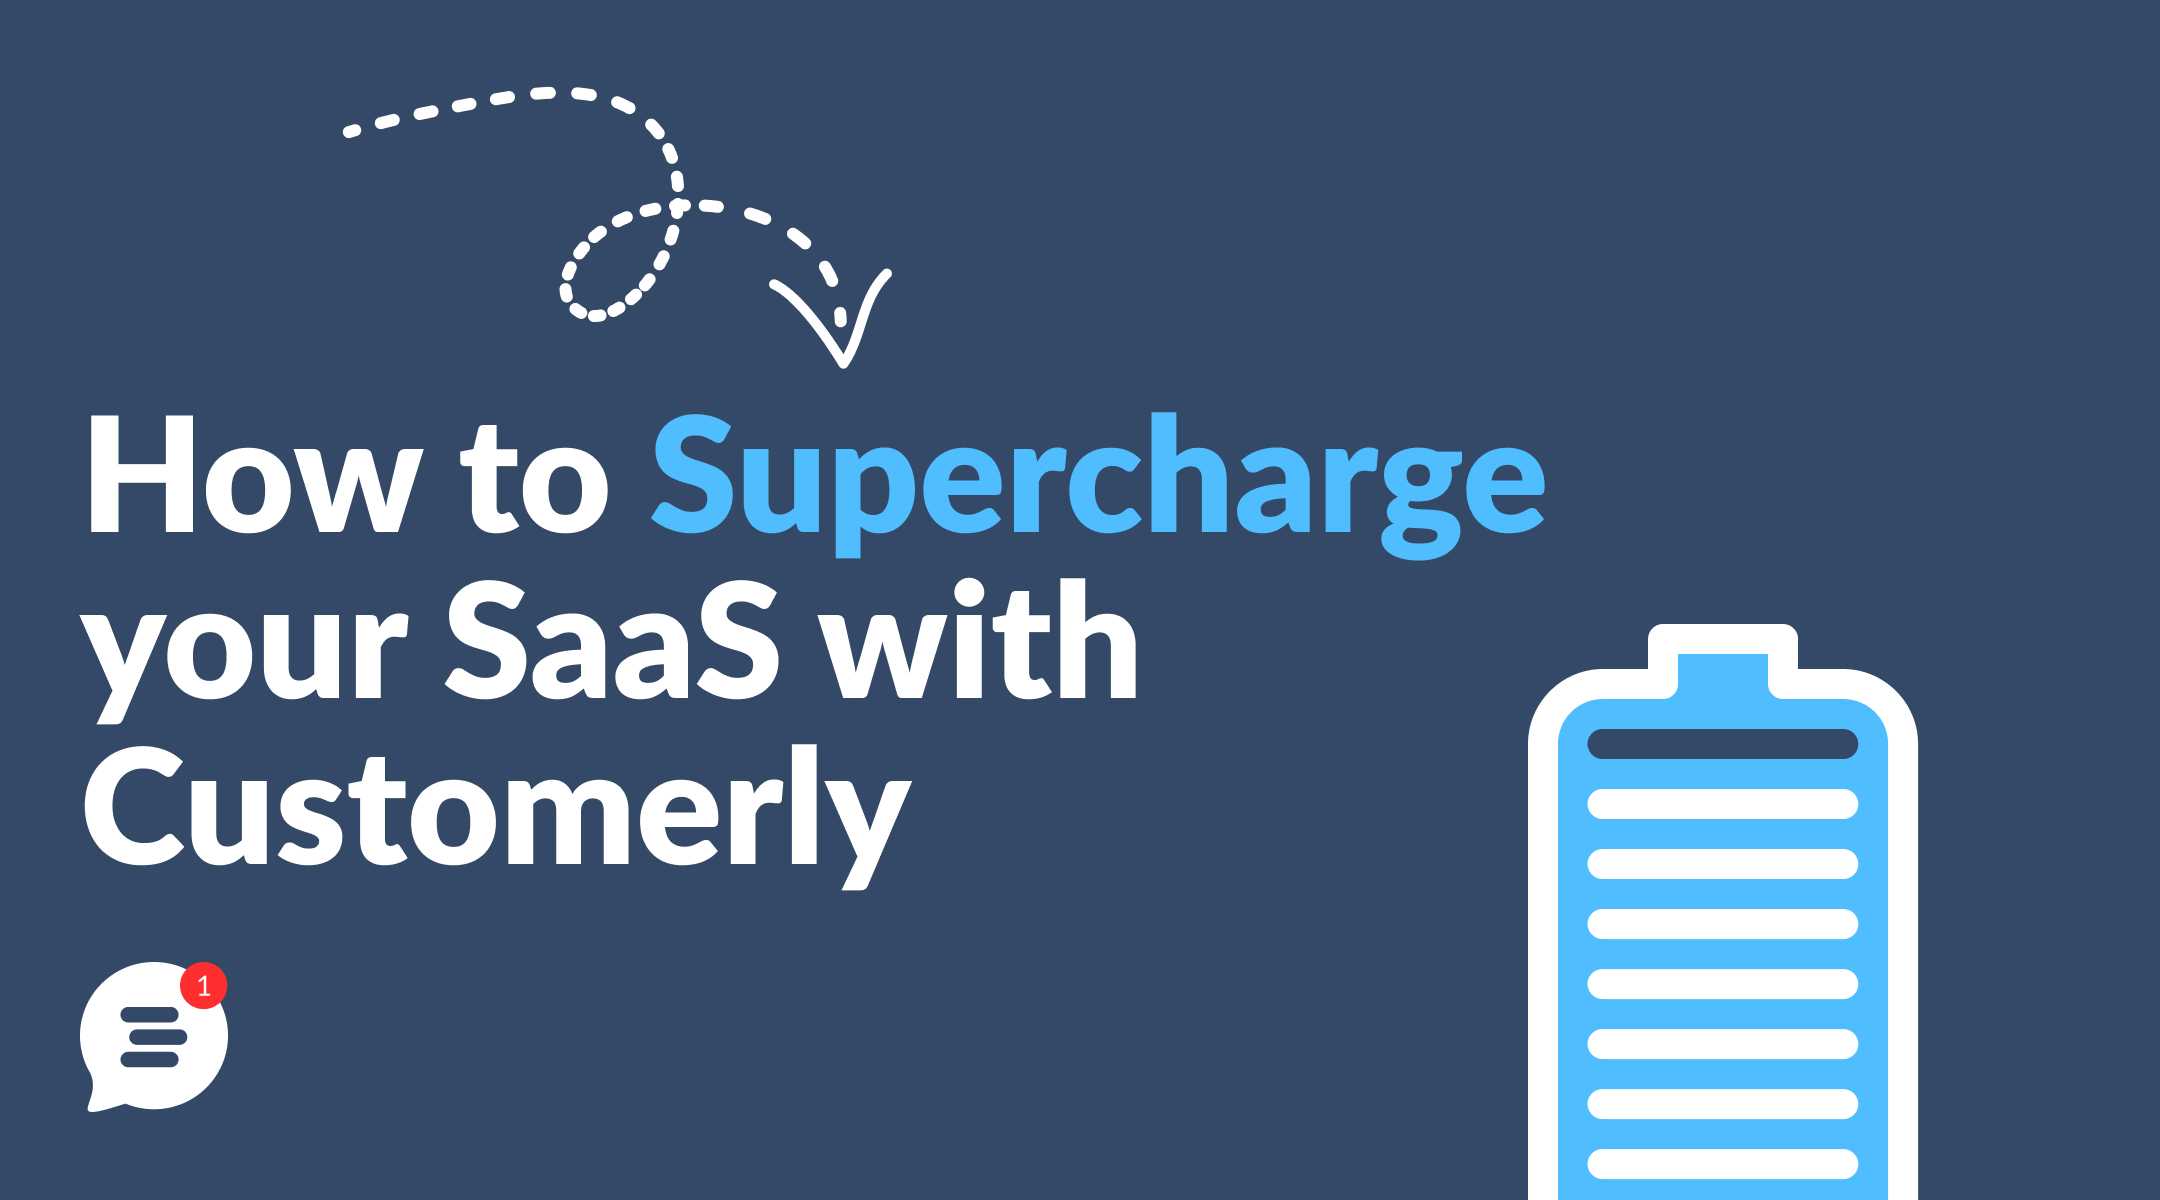 How to Supercharge your SaaS with Customerly